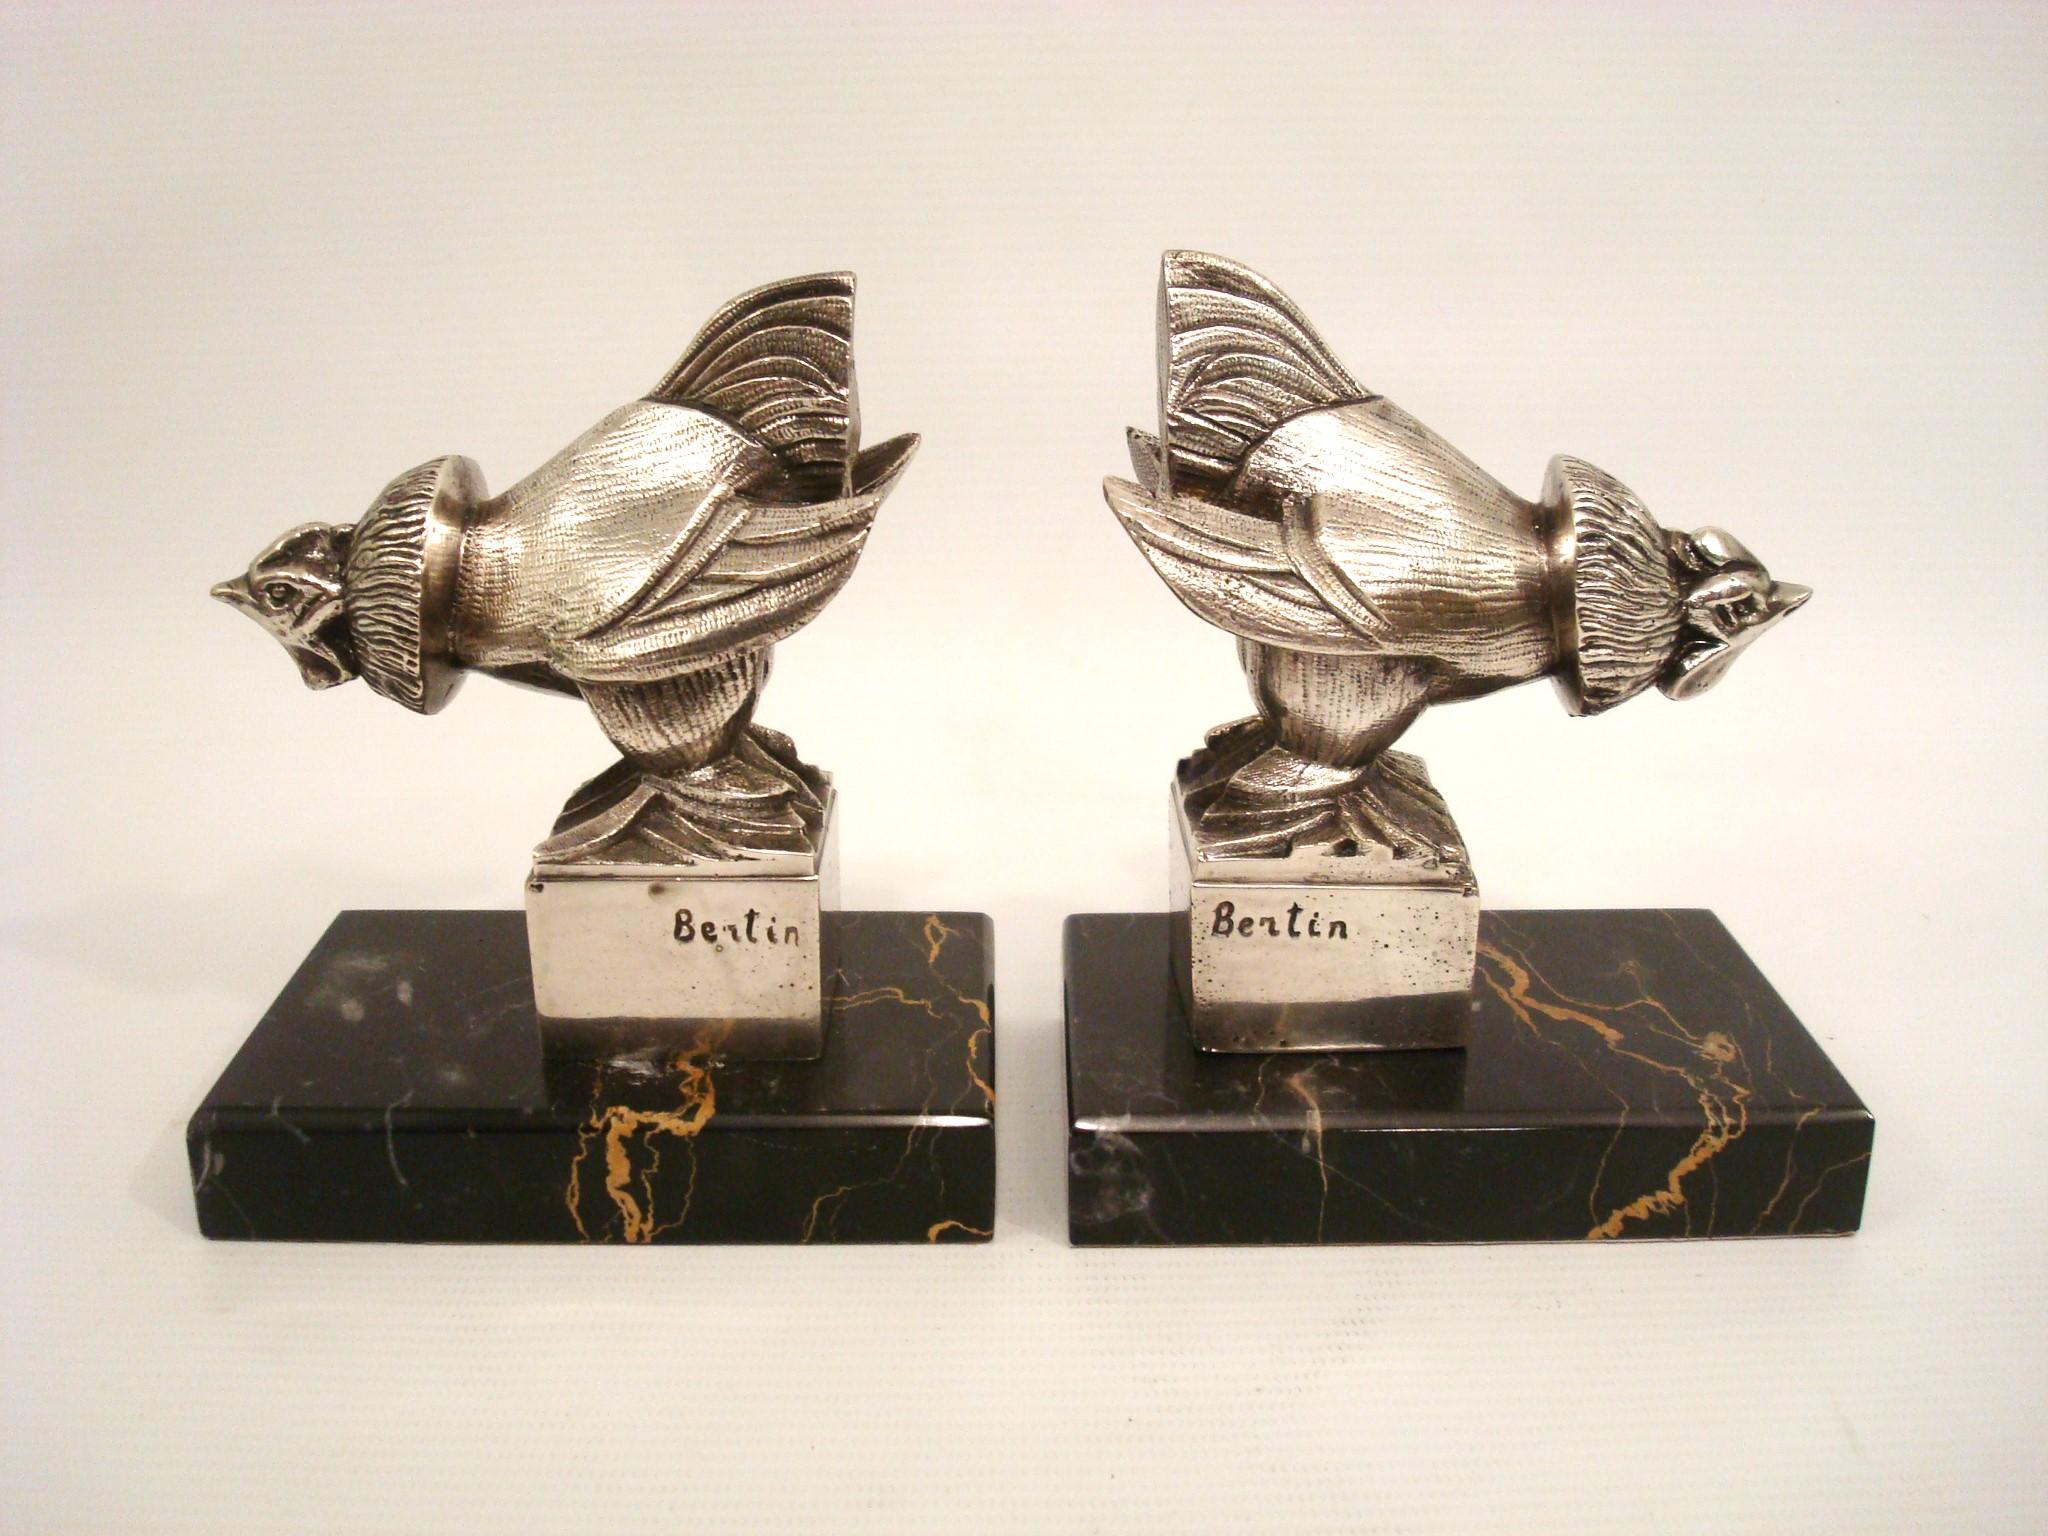 Art Deco Silvered Bronze Rooster Bookends. France 1920´s.
Signed by french artist Bertin. 
Silvered Bronze sculptures mounted over black and golden marble bases.
Excellent conditions.